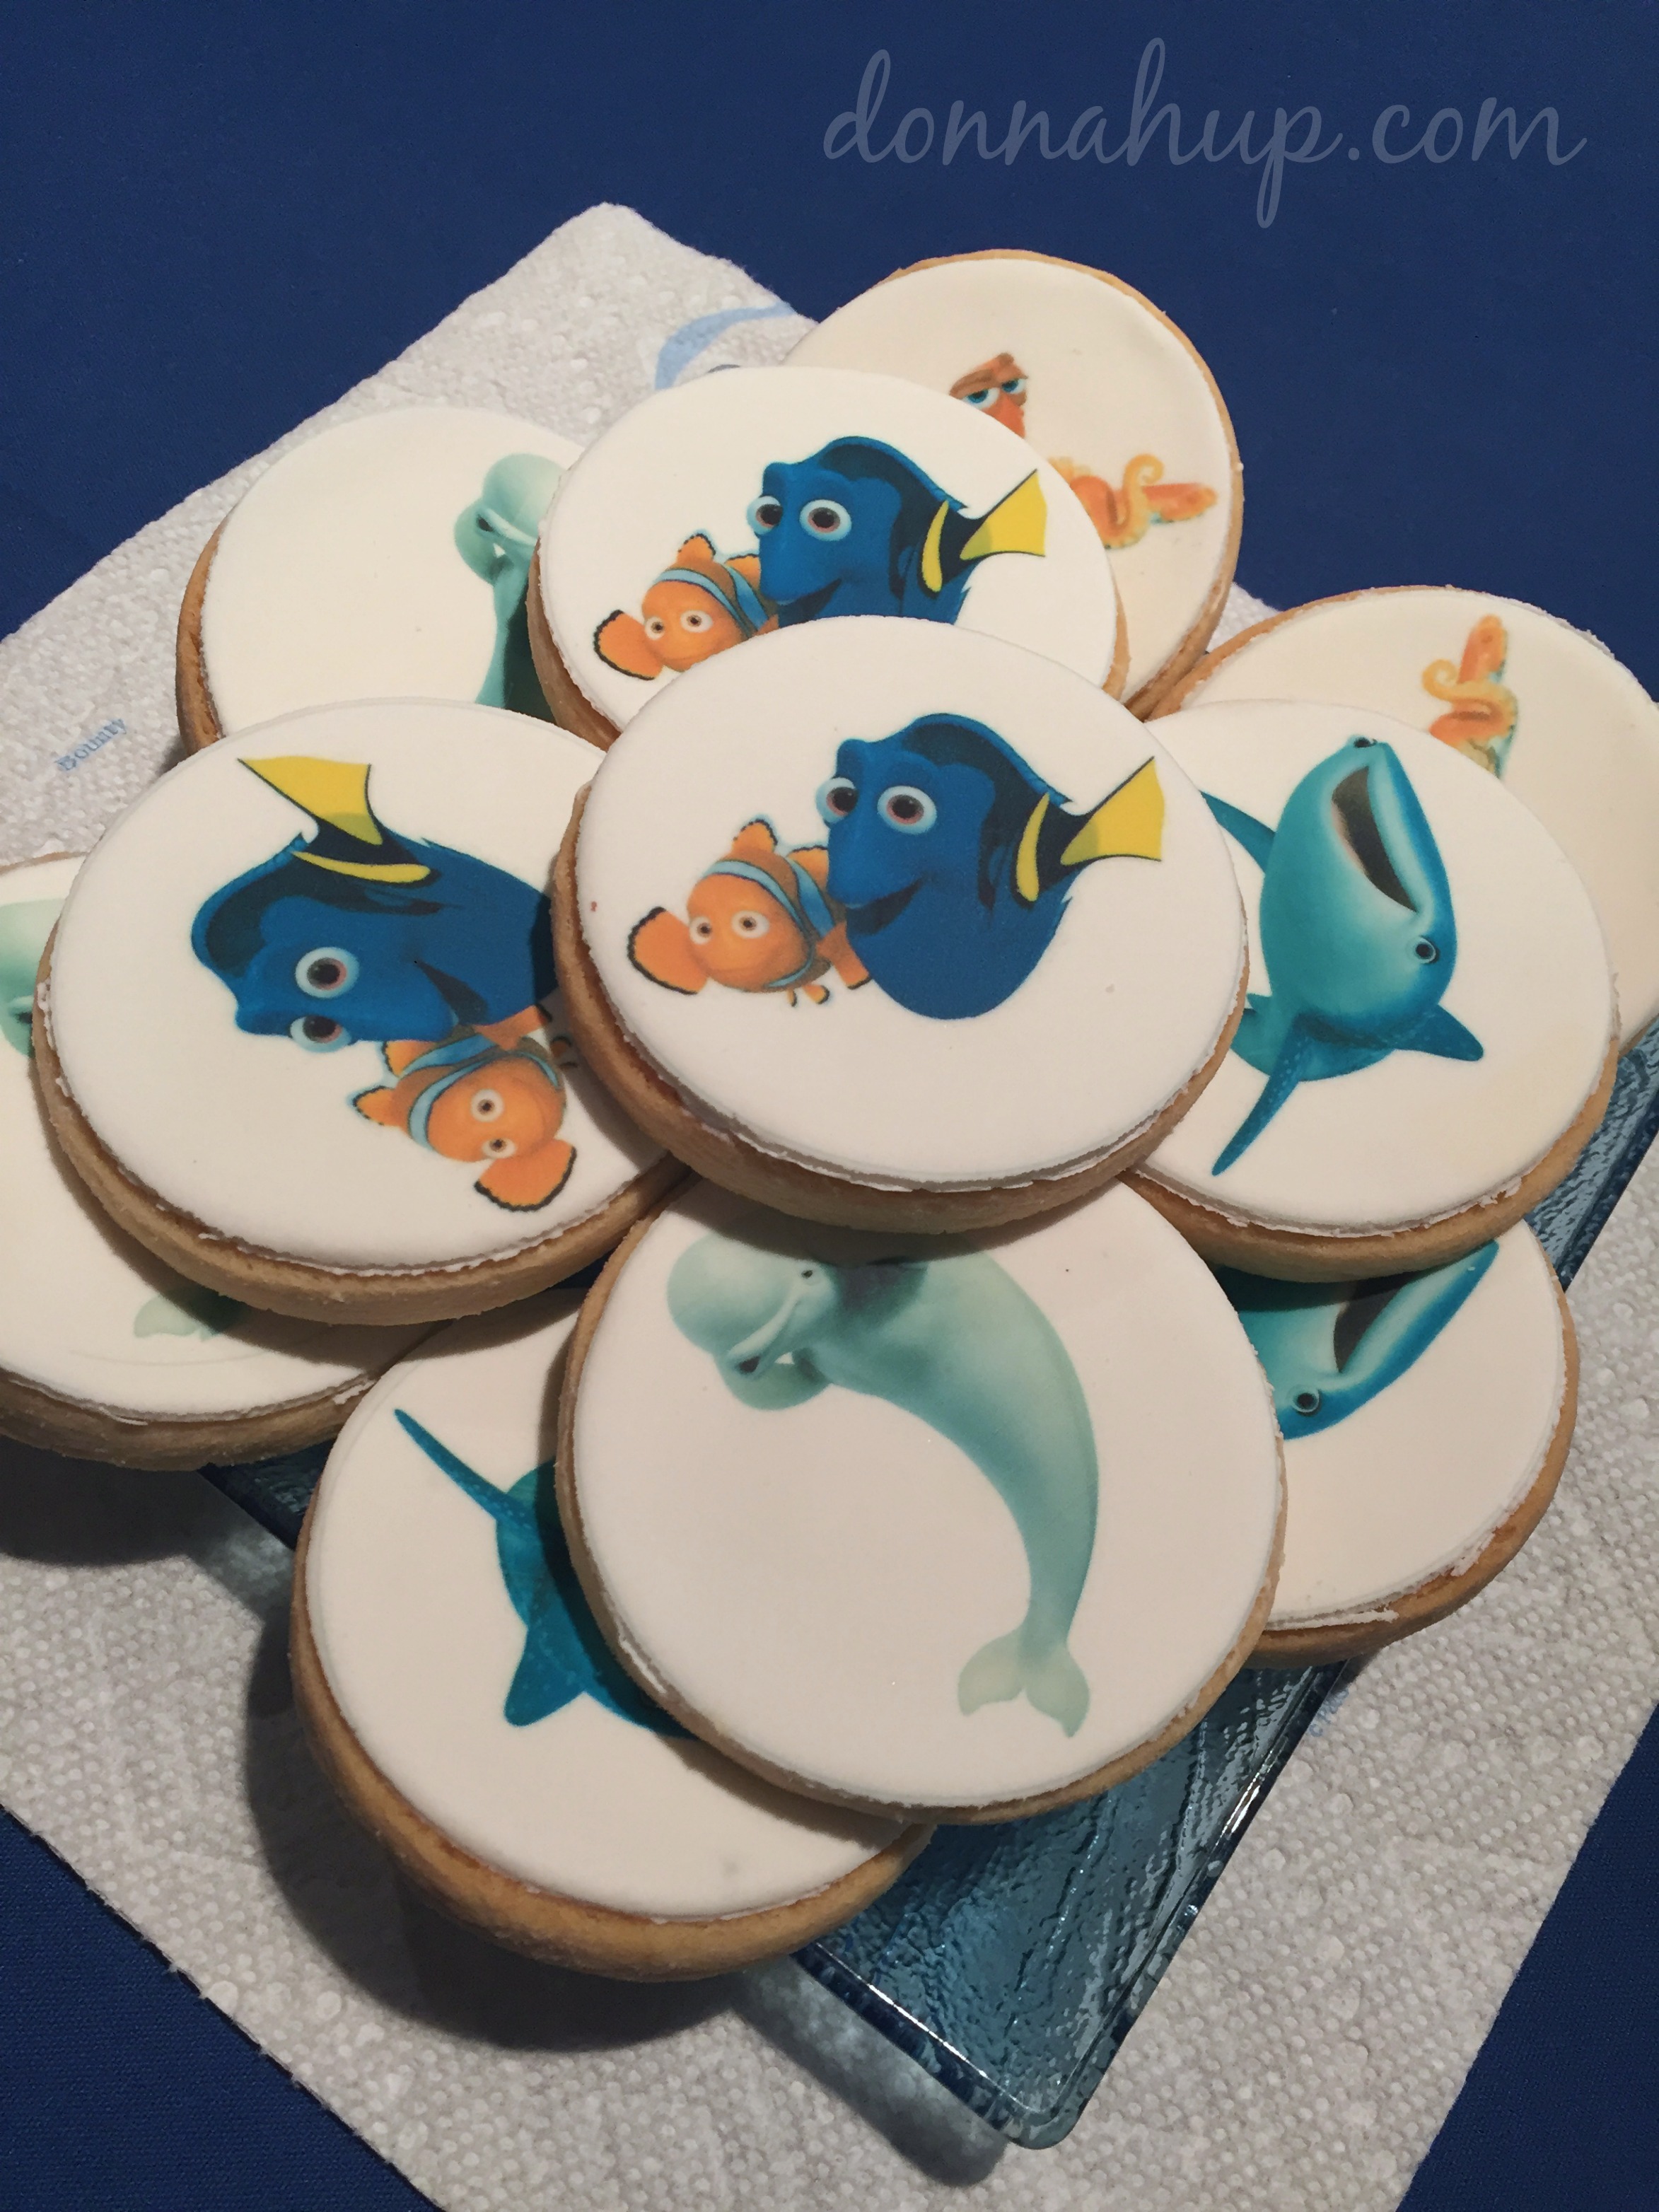 Even Bounty is celebrating FINDING DORY #FindingDoryEvent